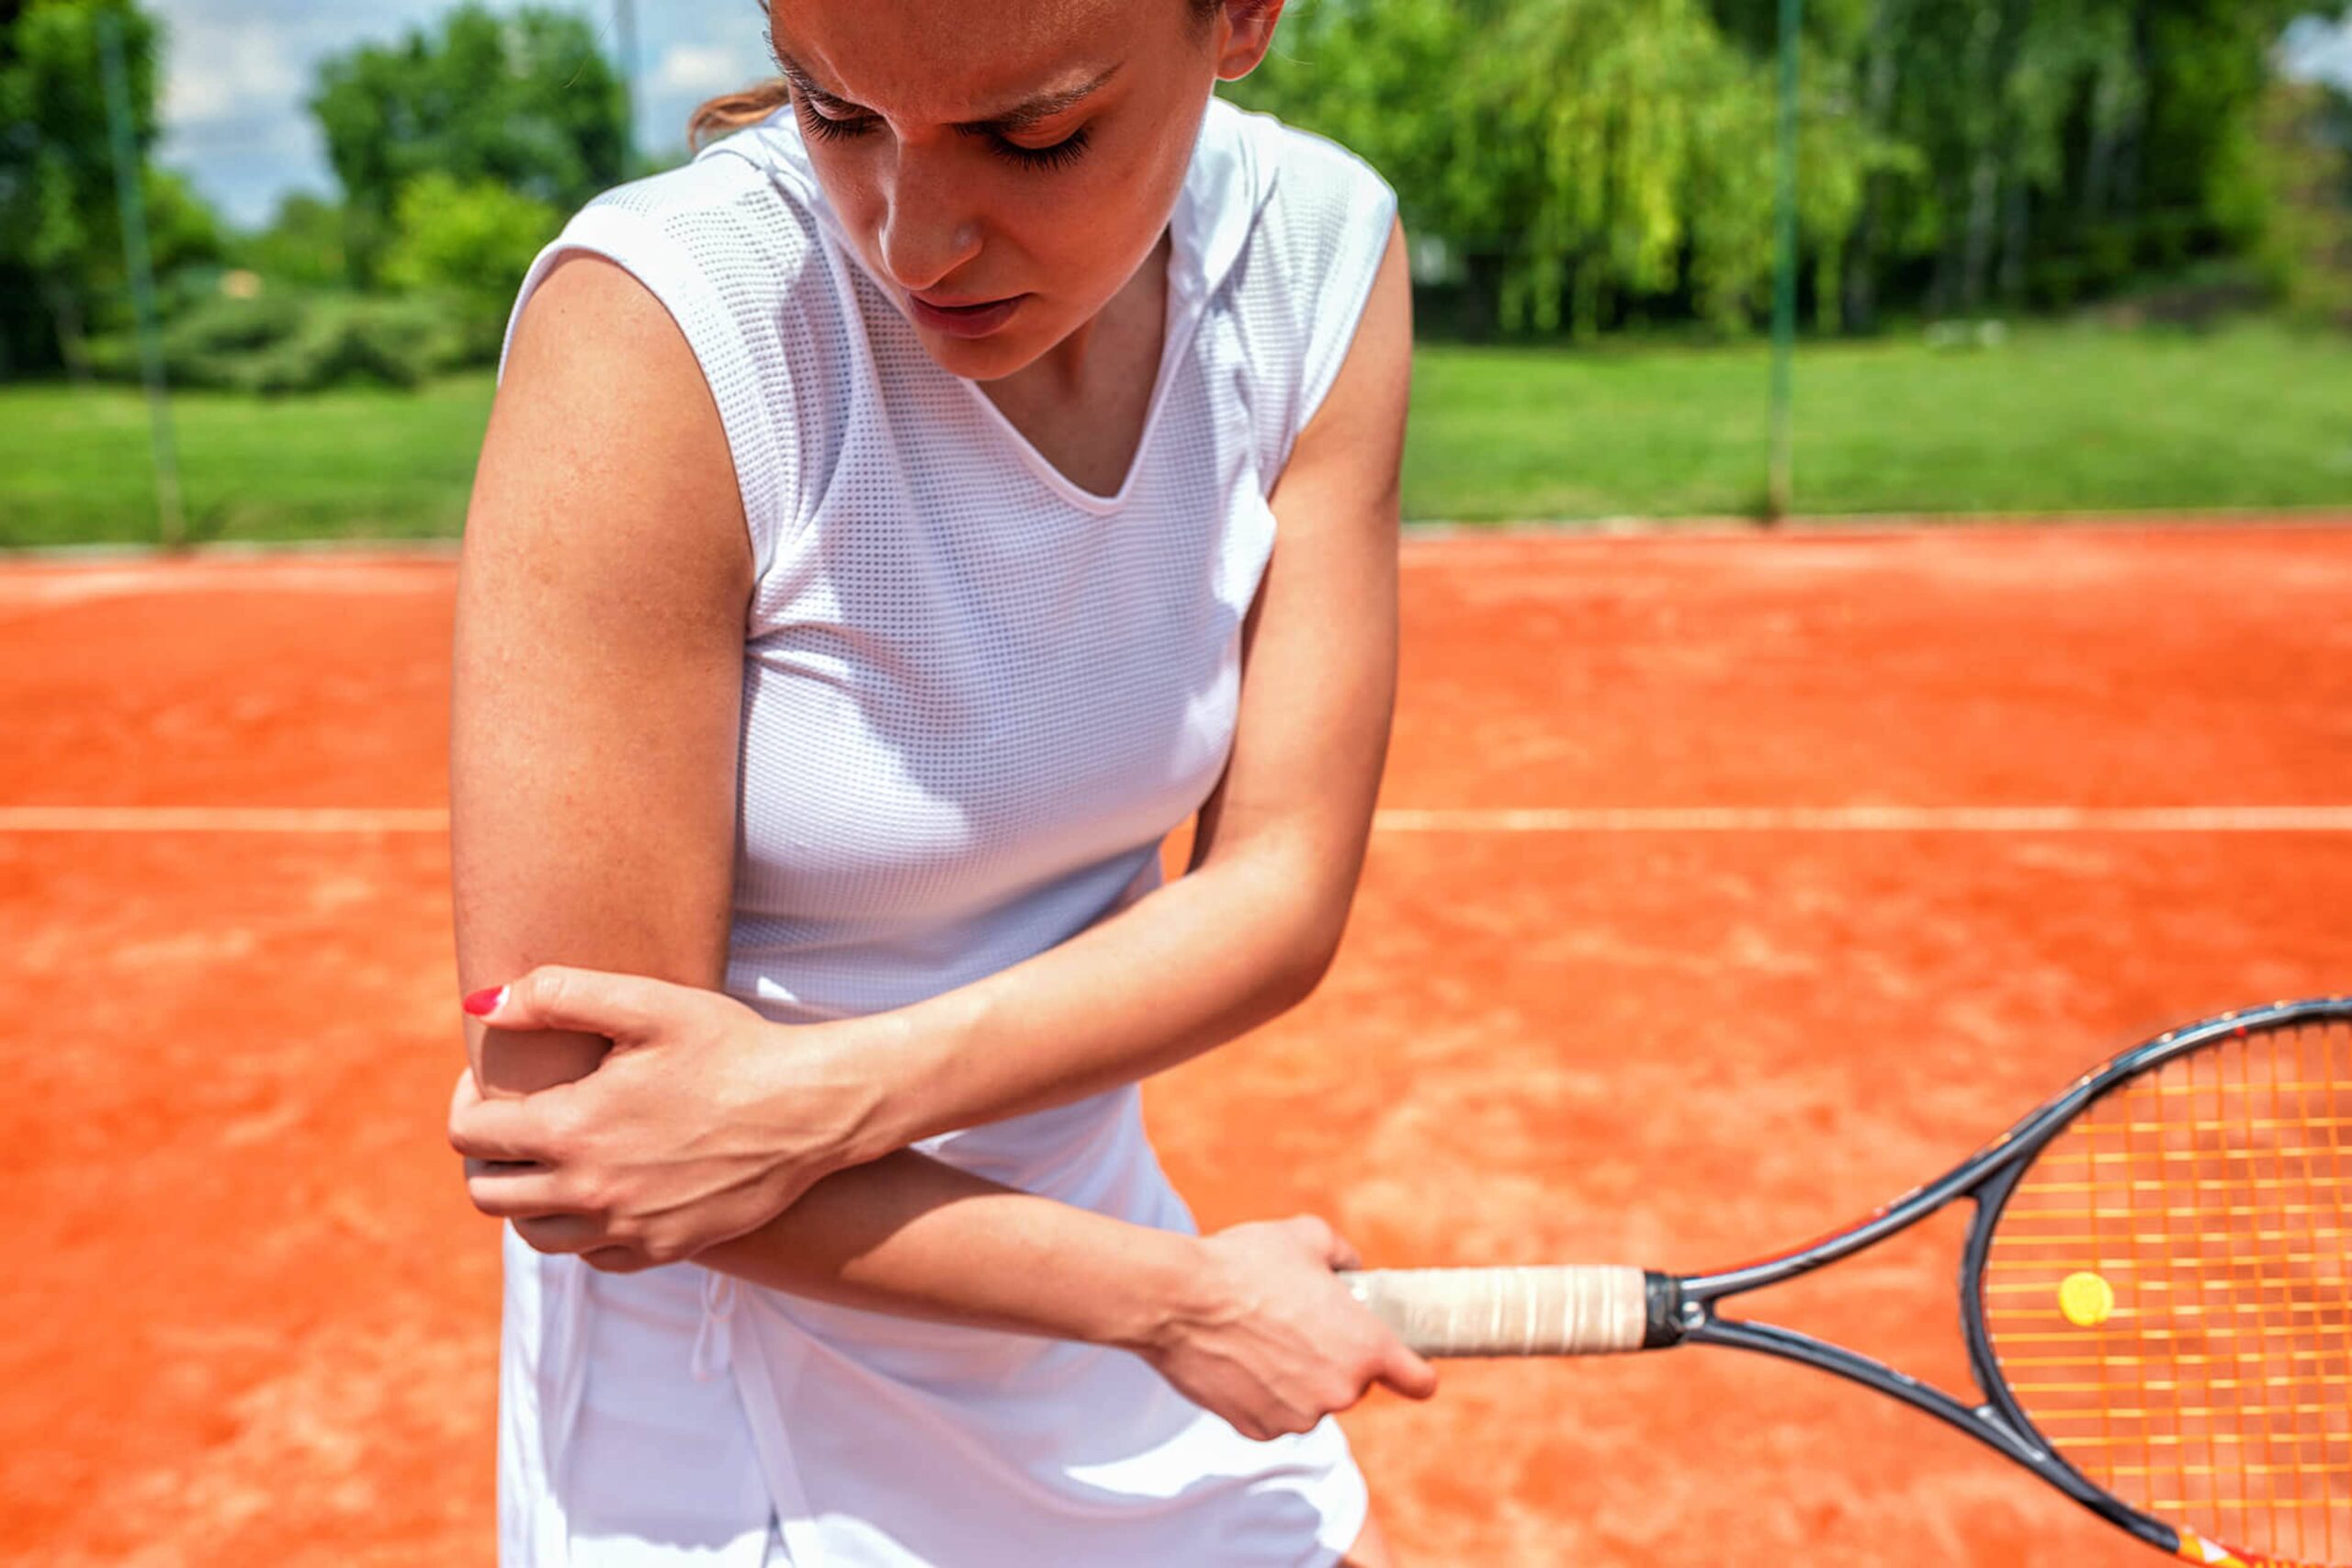 Tennis elbow is a common injury in the sports world and one that Dr. Goradia of G2 Orthopedics frequently treats!